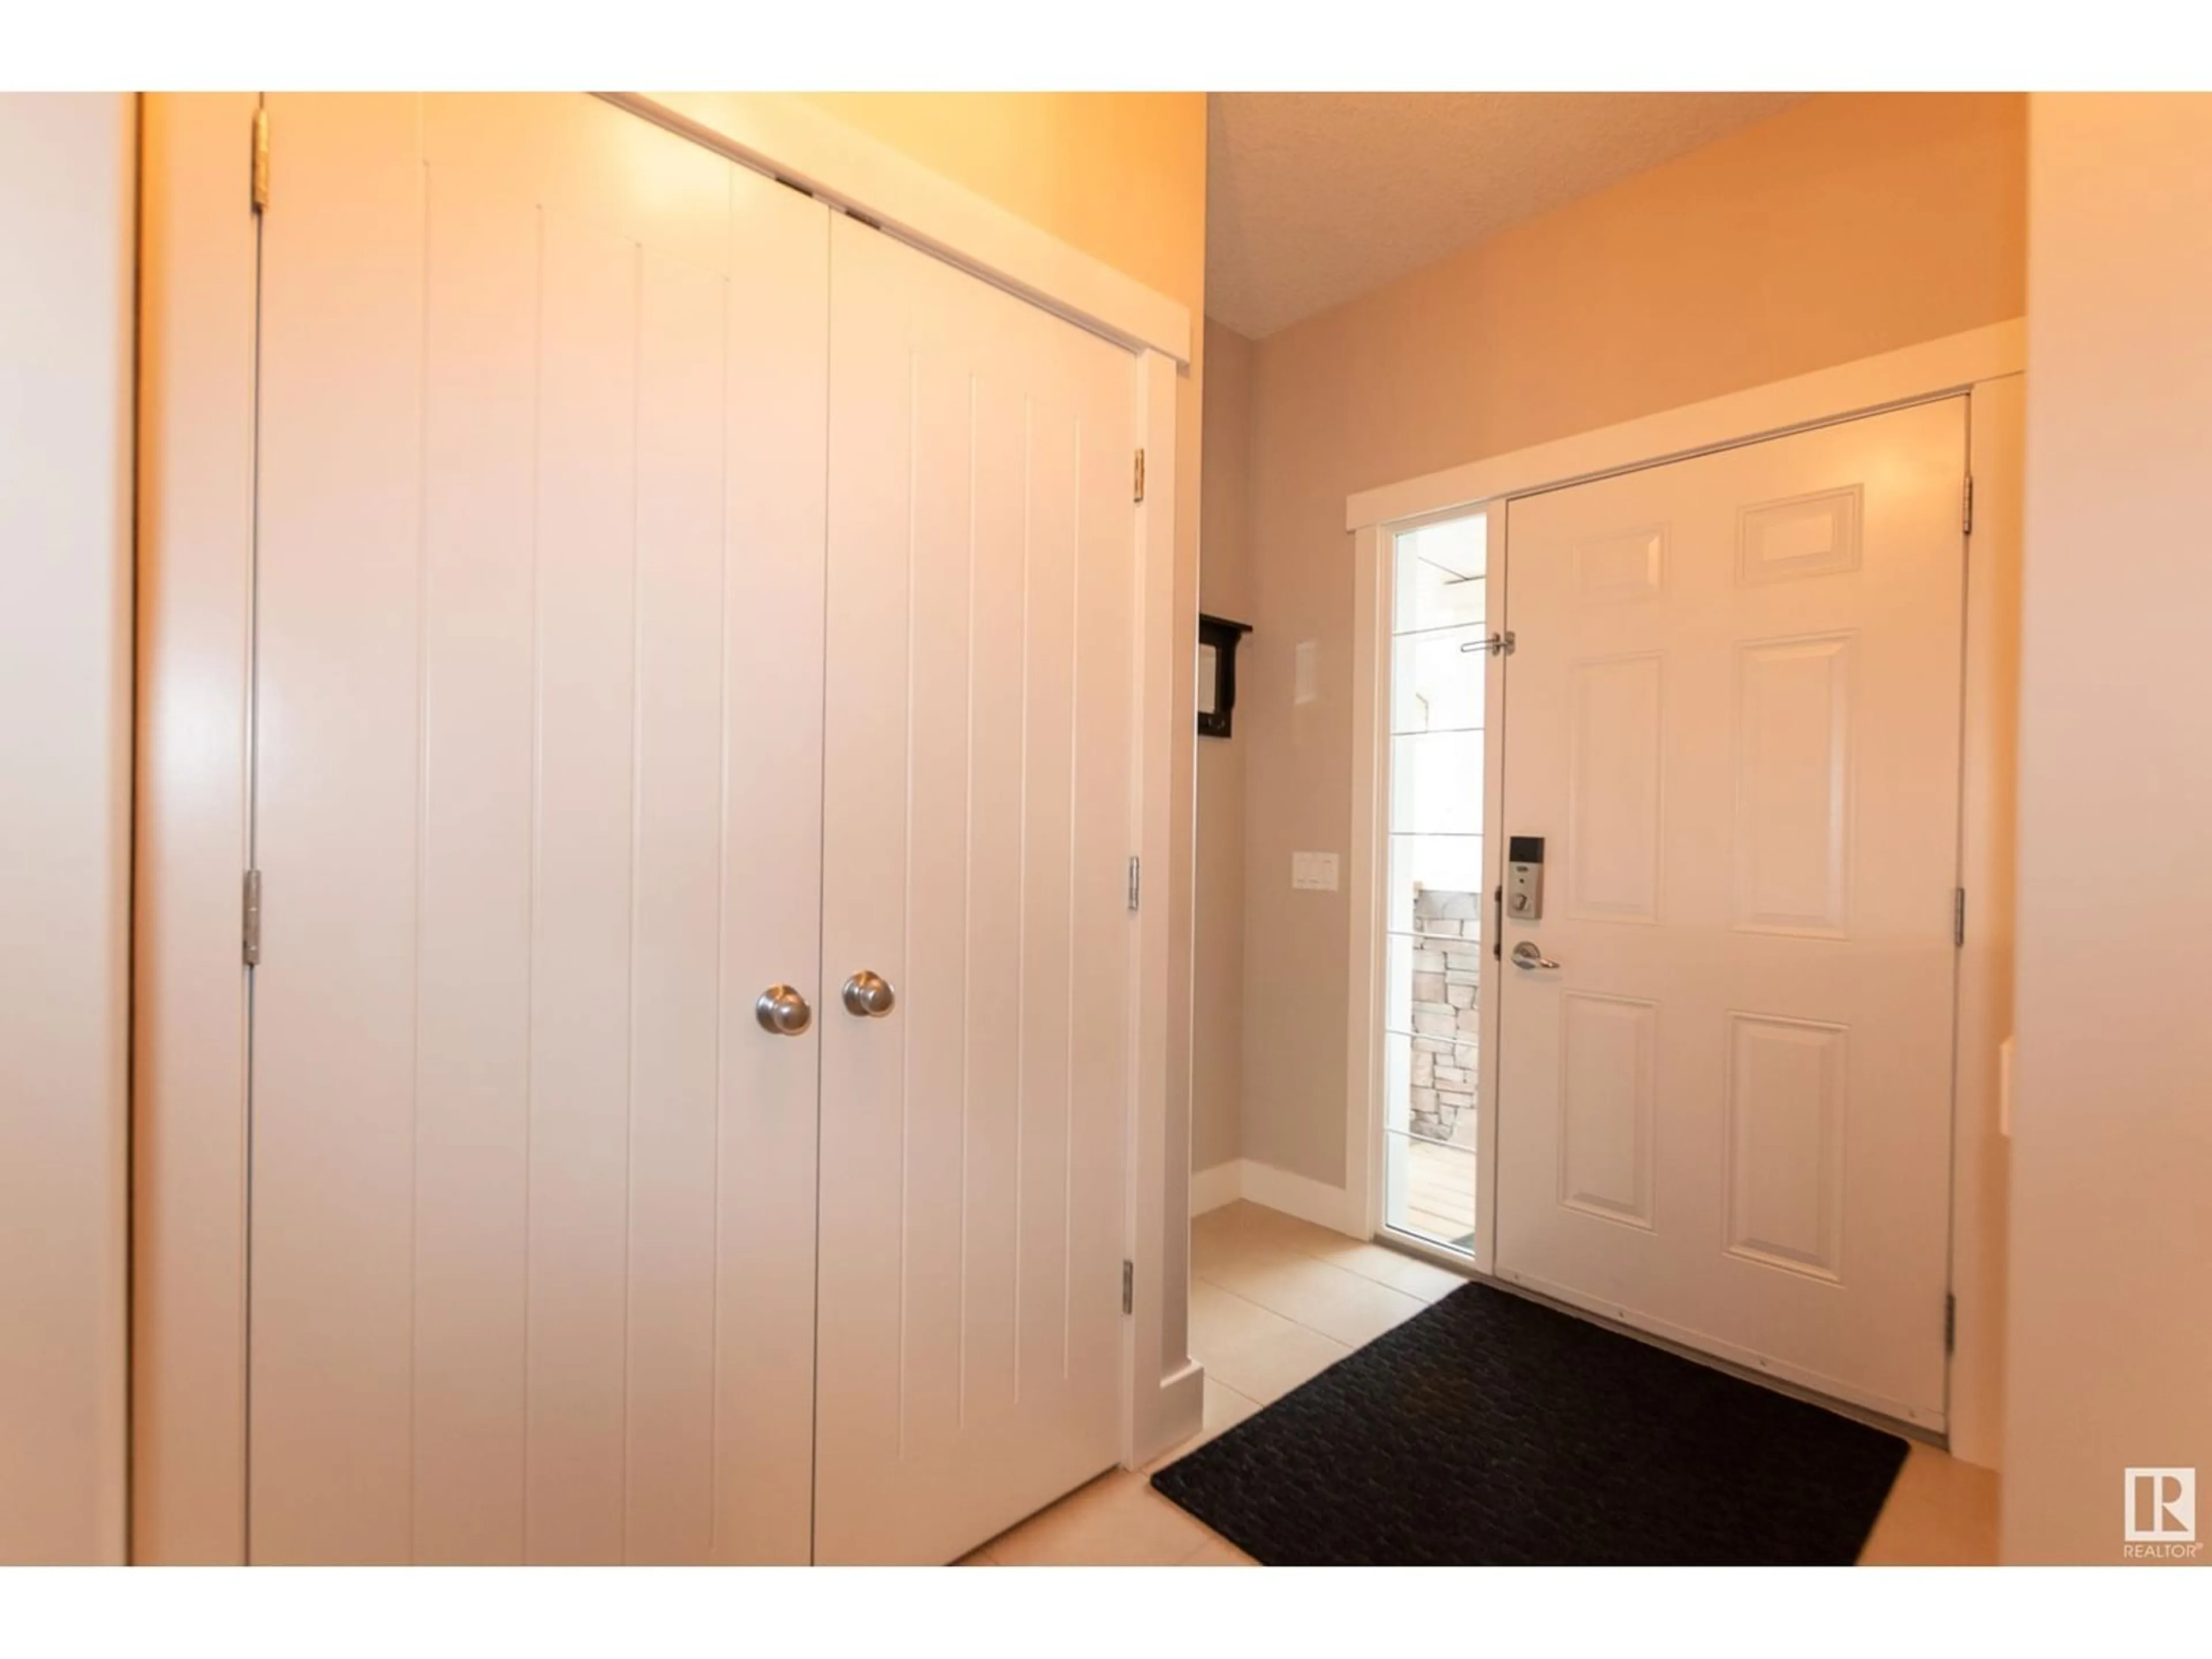 Indoor entryway for 10615 95 ST, Morinville Alberta T8R0A1